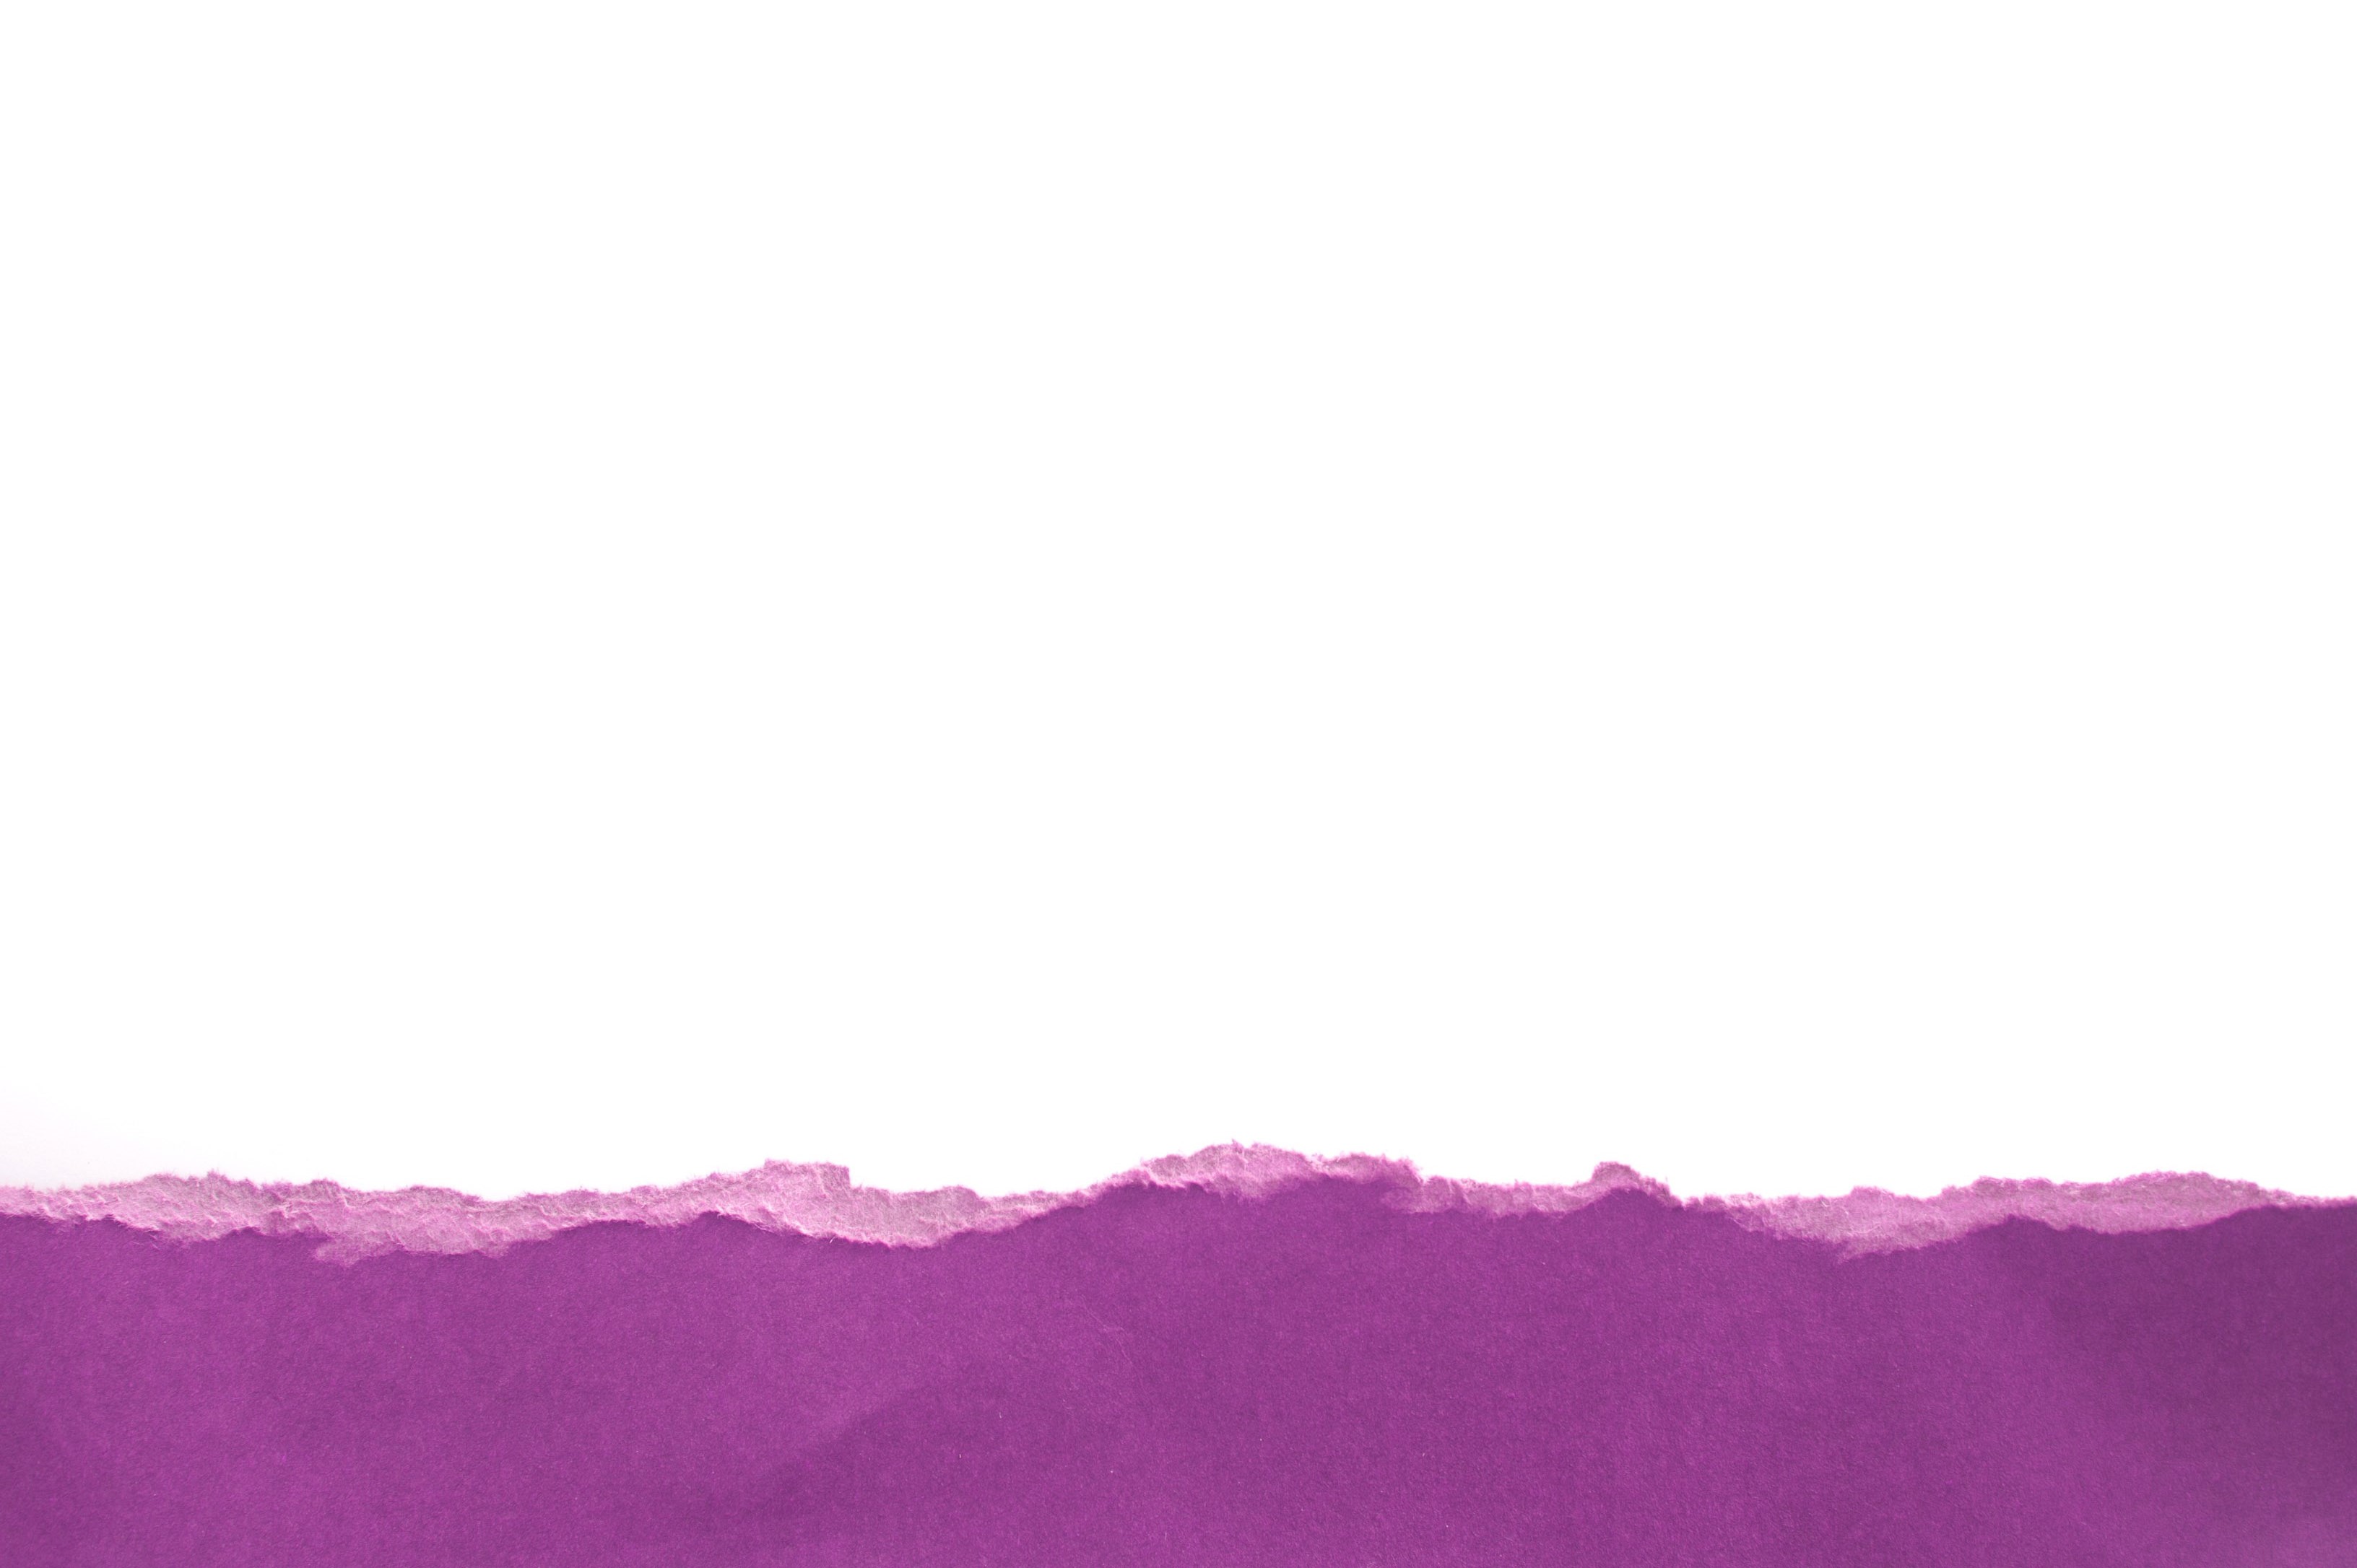 torn purple border | Free backgrounds and textures | Cr103.com